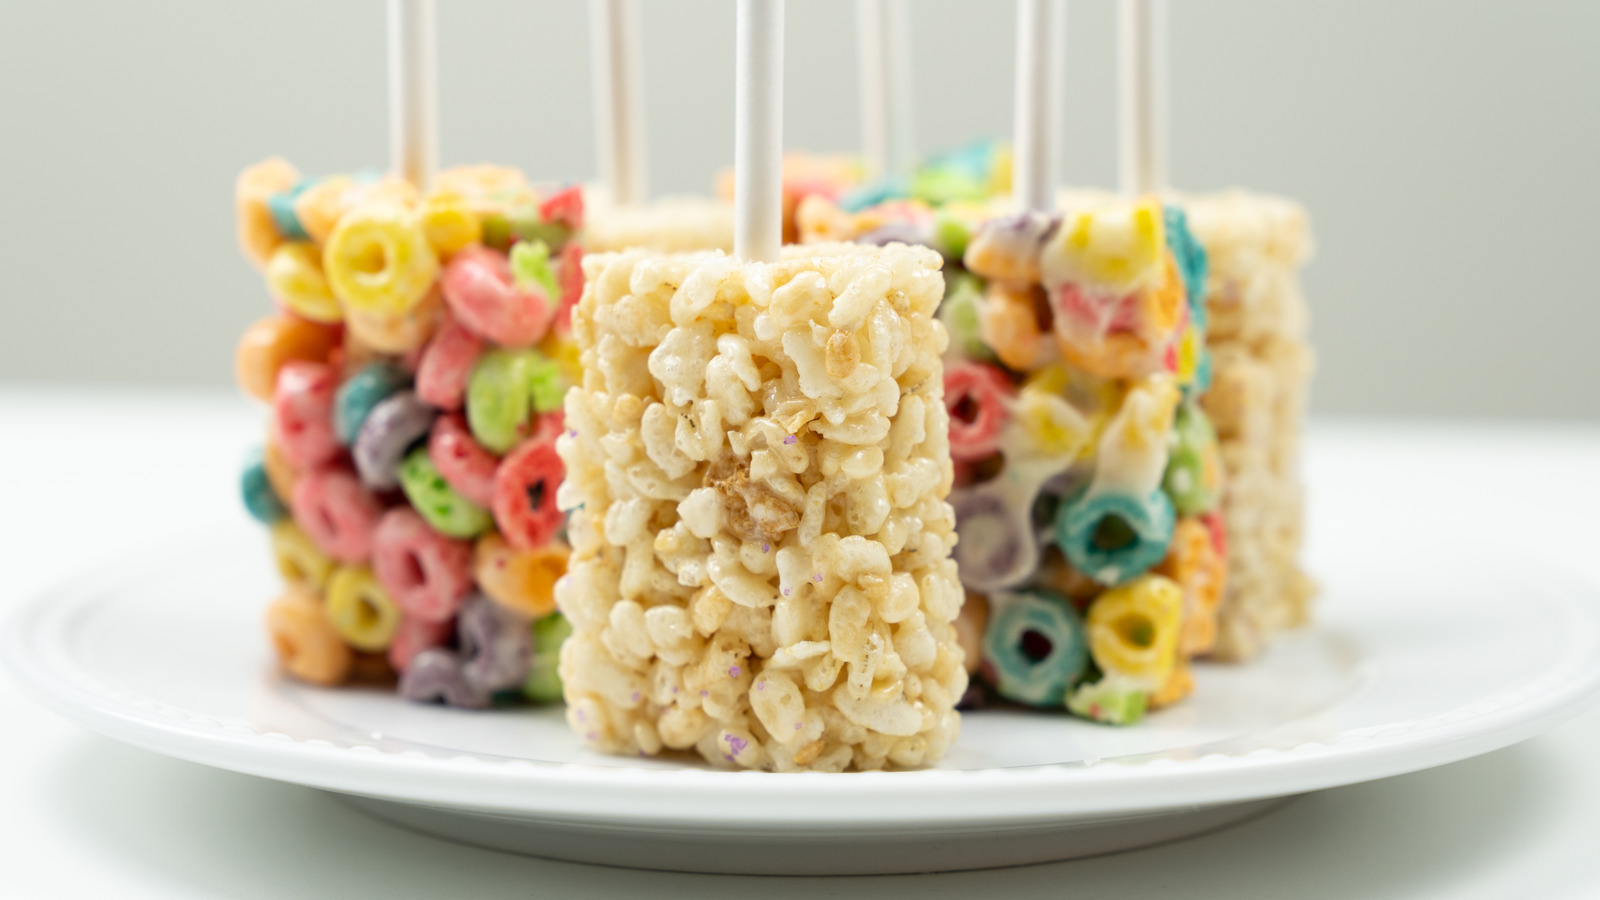 The 10 Best Cereals To Substitute In For Rice Krispies Treats